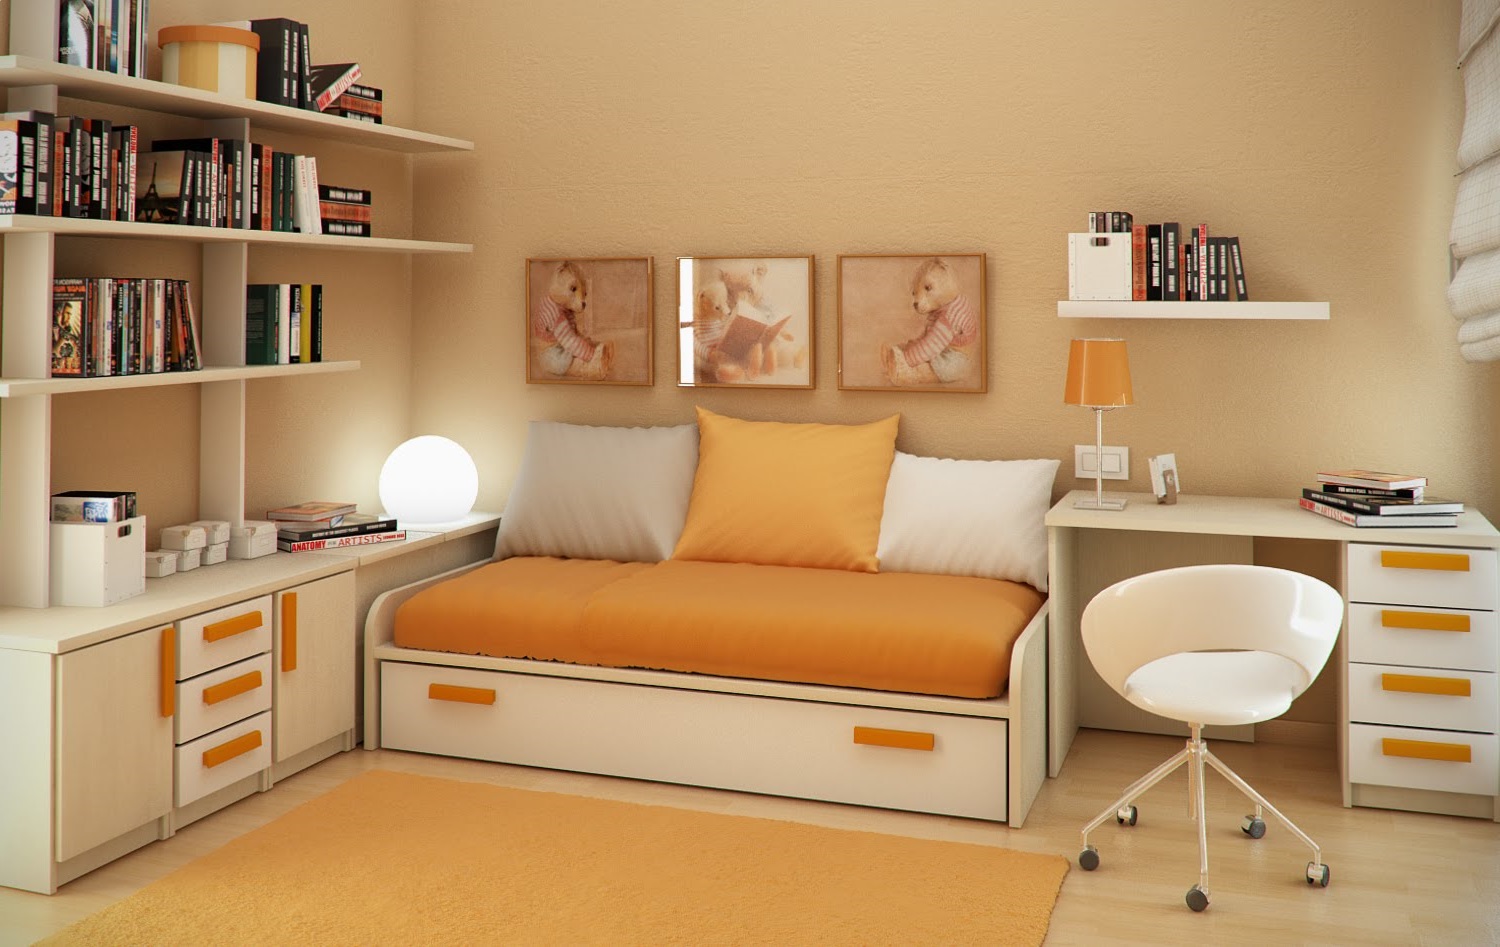 Interior Design Minimalist Captivating Interior Design Styles Of Minimalist Bedroom With Single Bed On Platform Drawer Furnished With Desk Sets And Completed With Wall Cabinet Also Bookcase Interior Design Composing The Classic Or Modern Interior Design Styles